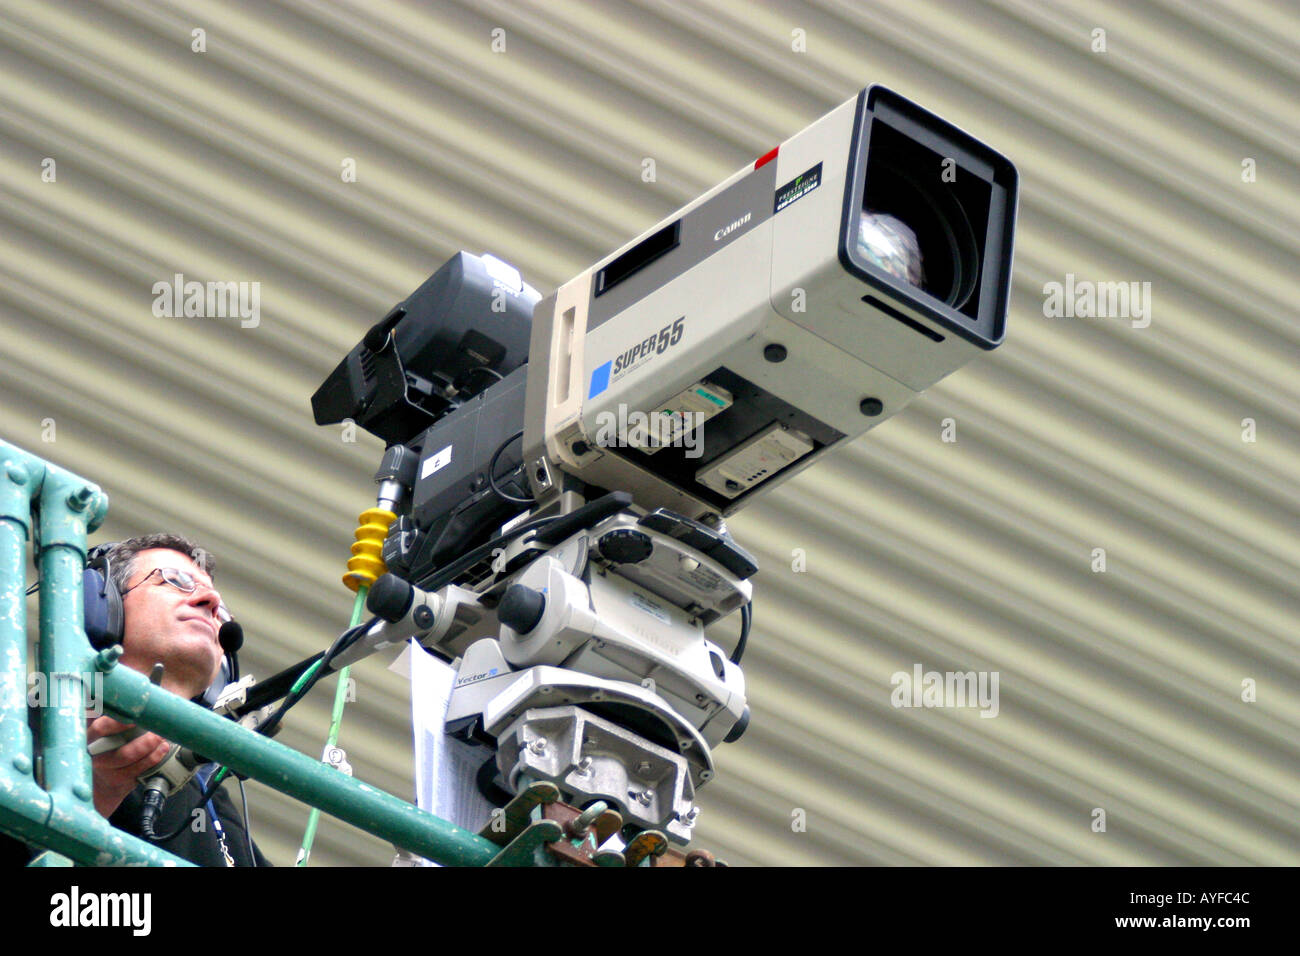 Outside broadcast TV camera at sports event Stock Photo - Alamy